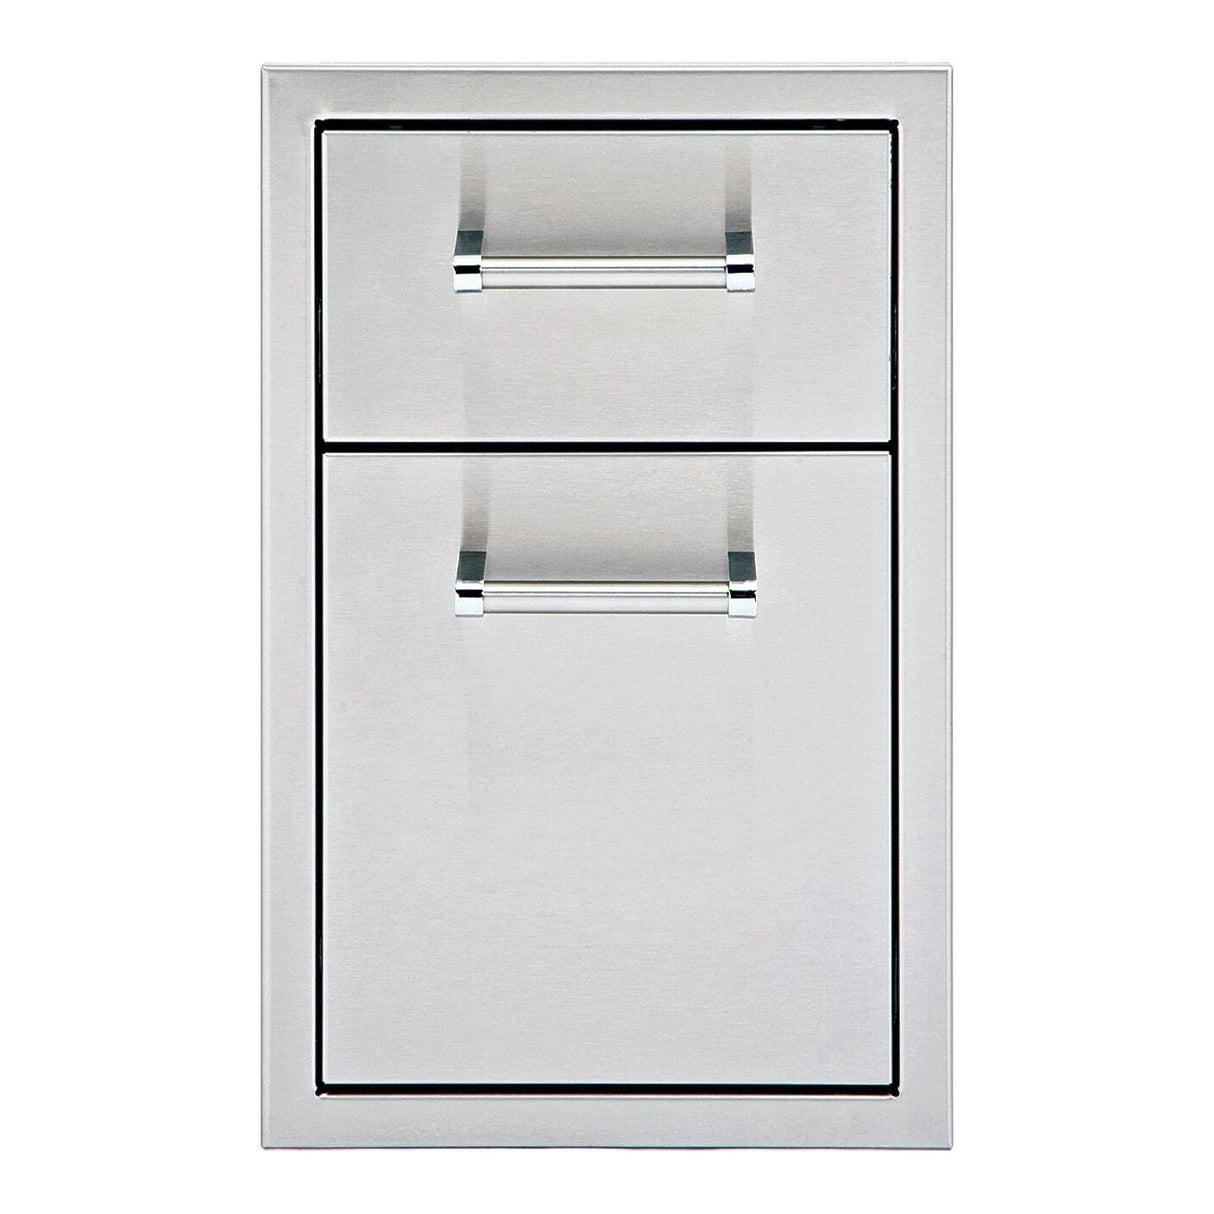 Delta Heat 13-Inch Stainless Steel Double Access Drawer